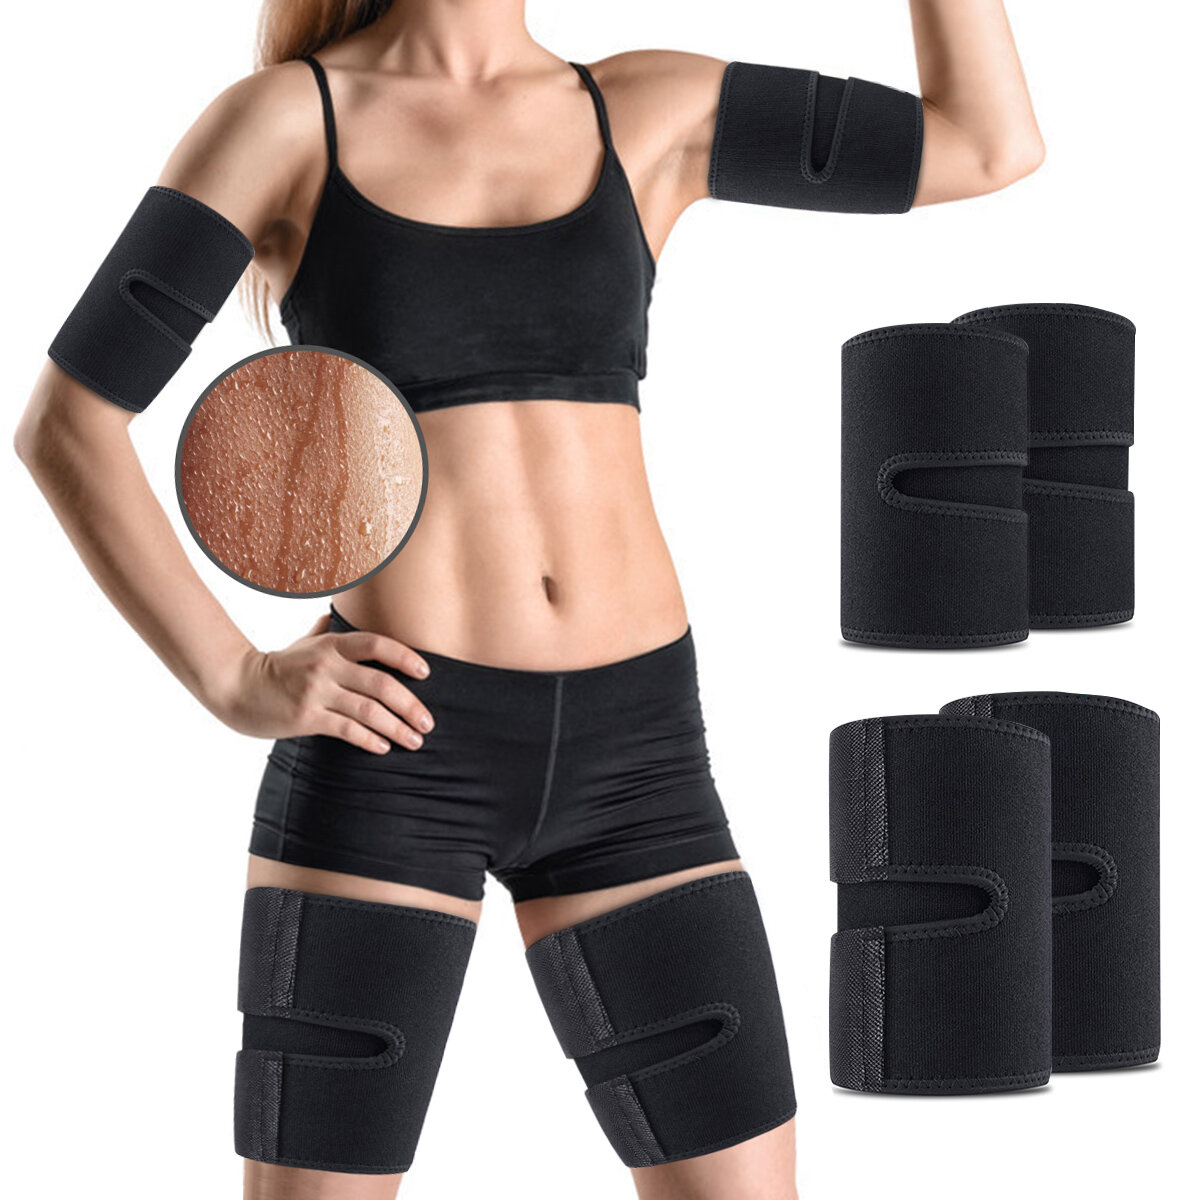 OUTERDO 4PCS Kit Arm and Thigh Sport Protective Straps Trimmers Tape Body Exercise Wraps Adjustable 